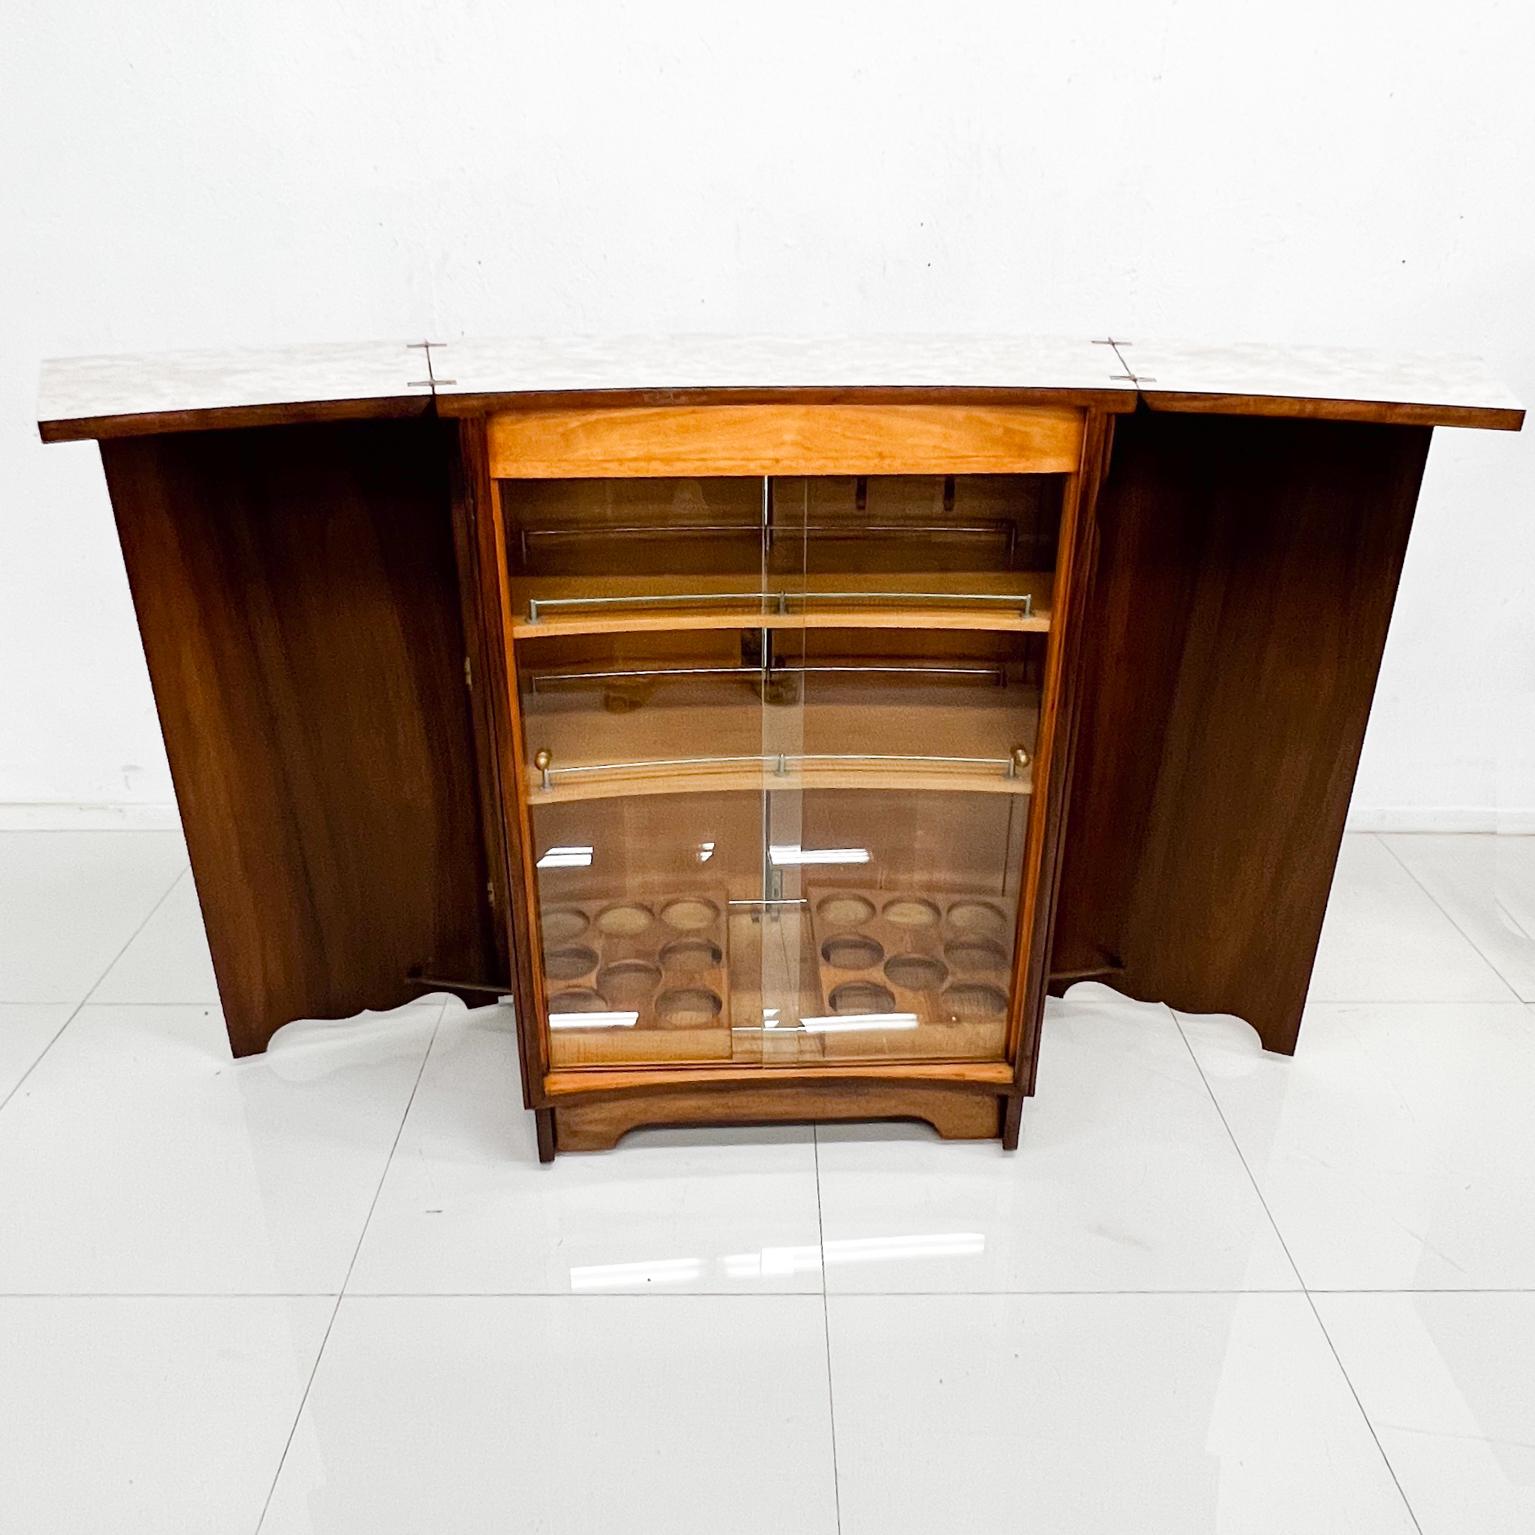 1930s Exquisite English Art Deco Cocktail Dry Bar Burlwood and Walnut 5